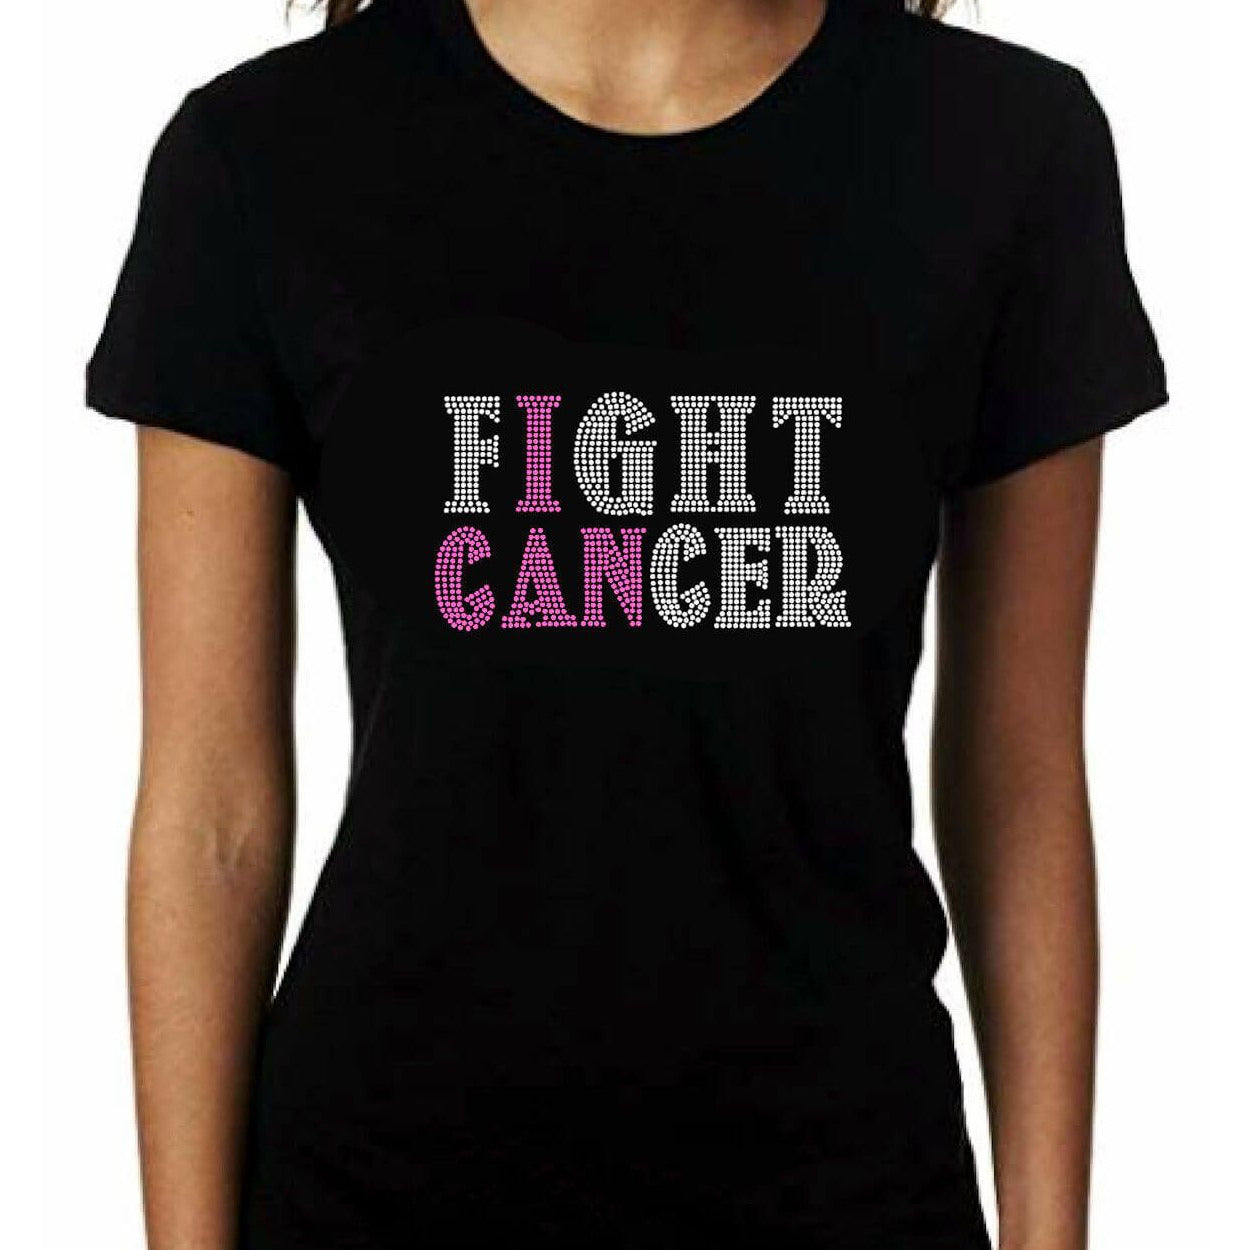 i can fight cancer